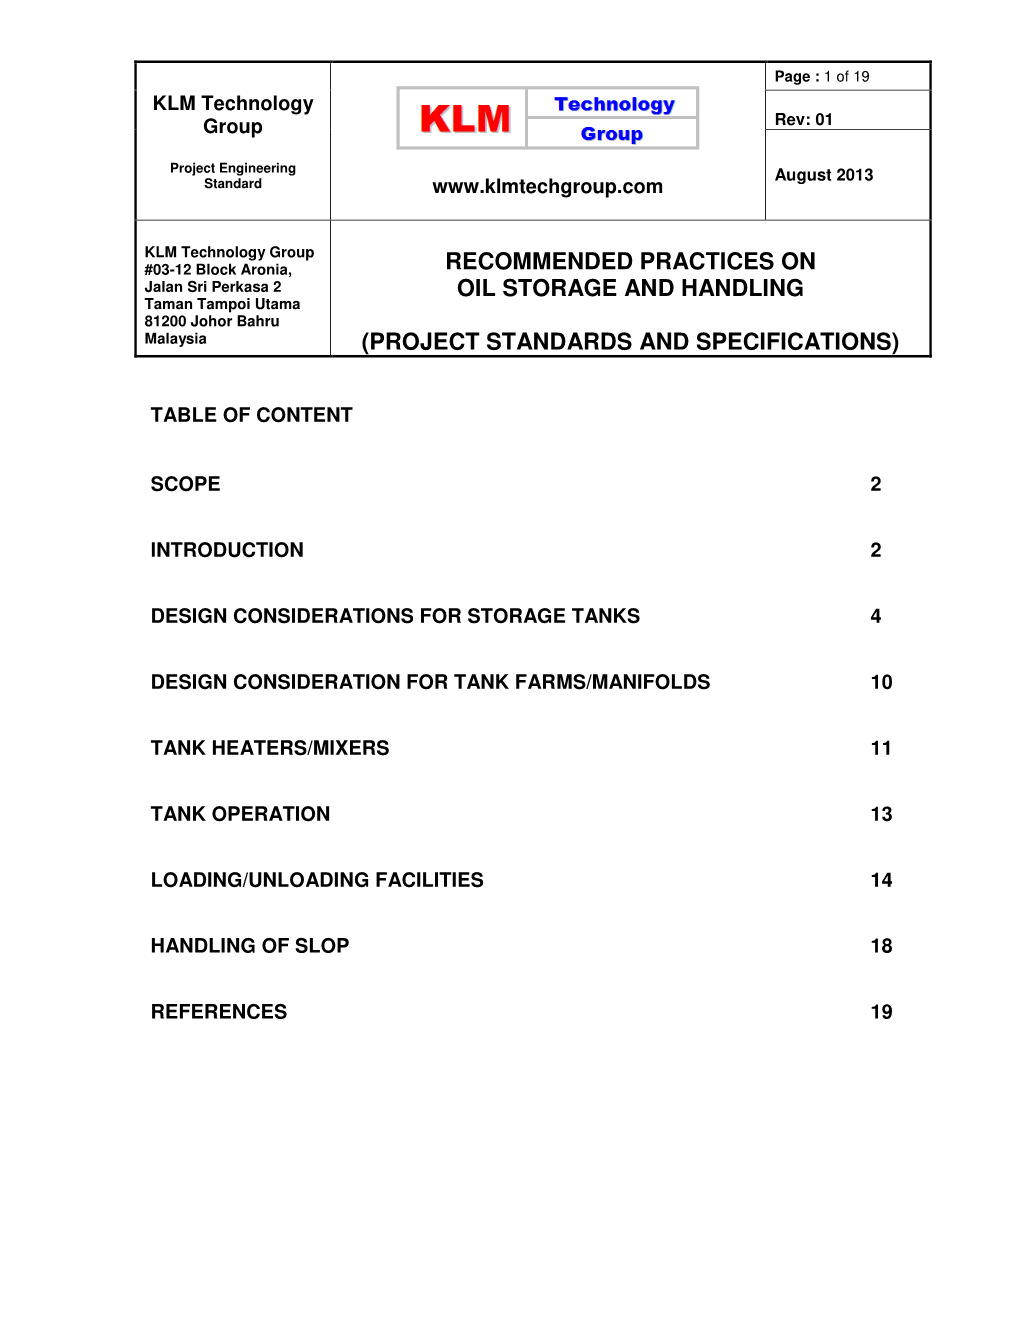 Recommended Practices on Oil Storage and Handling (Project Standards and Specifications)